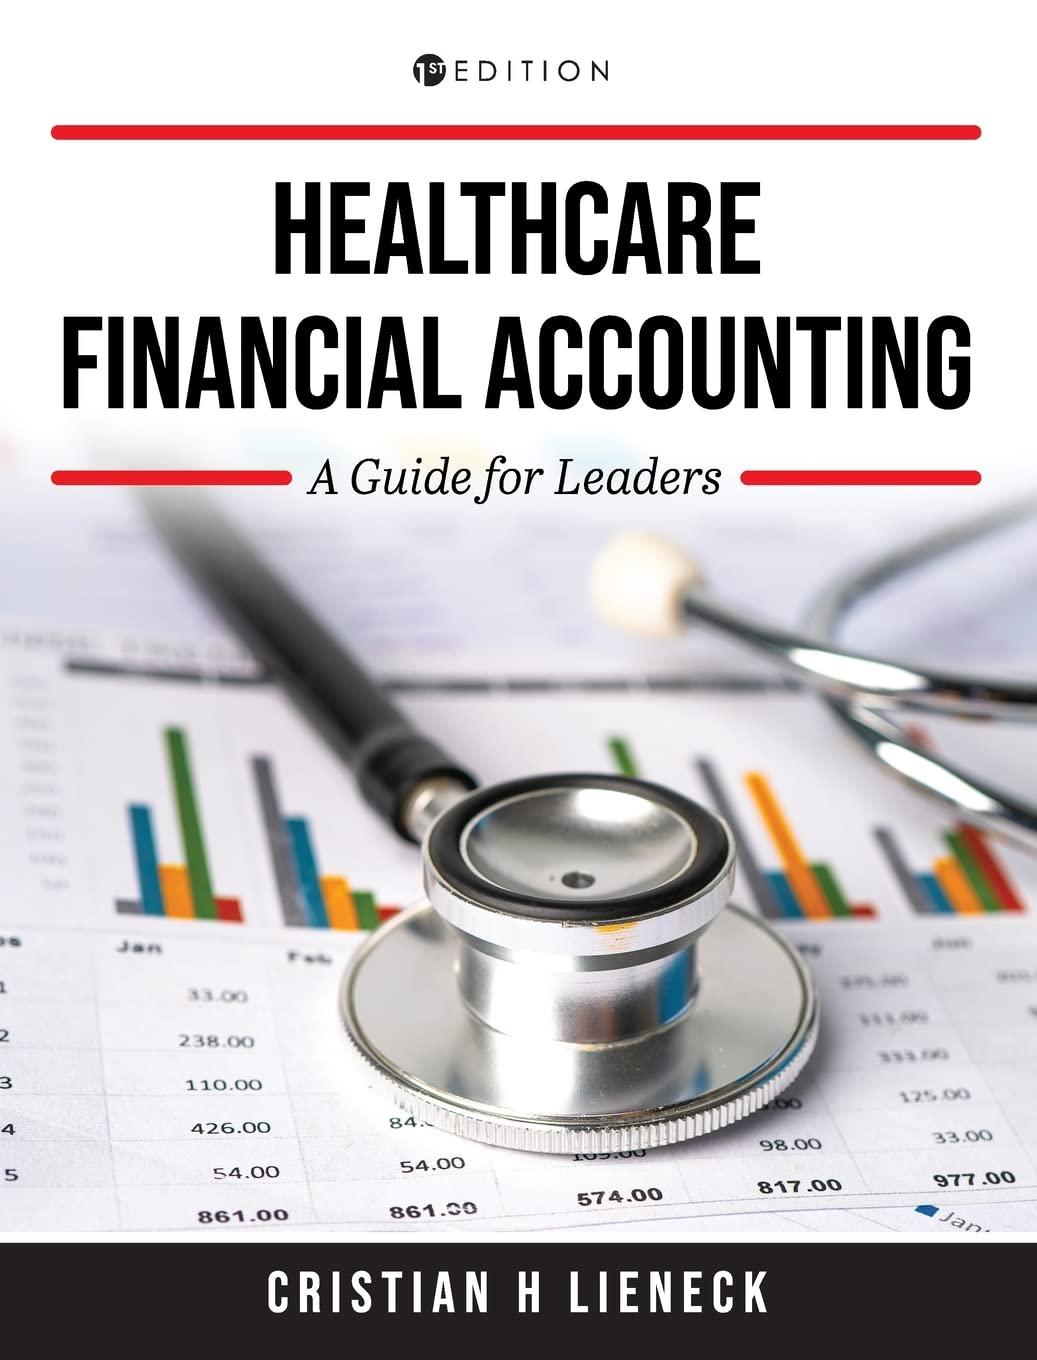 healthcare financial accounting a guide for leaders 1st edition cristian h lieneck 1793562822, 978-1793562821